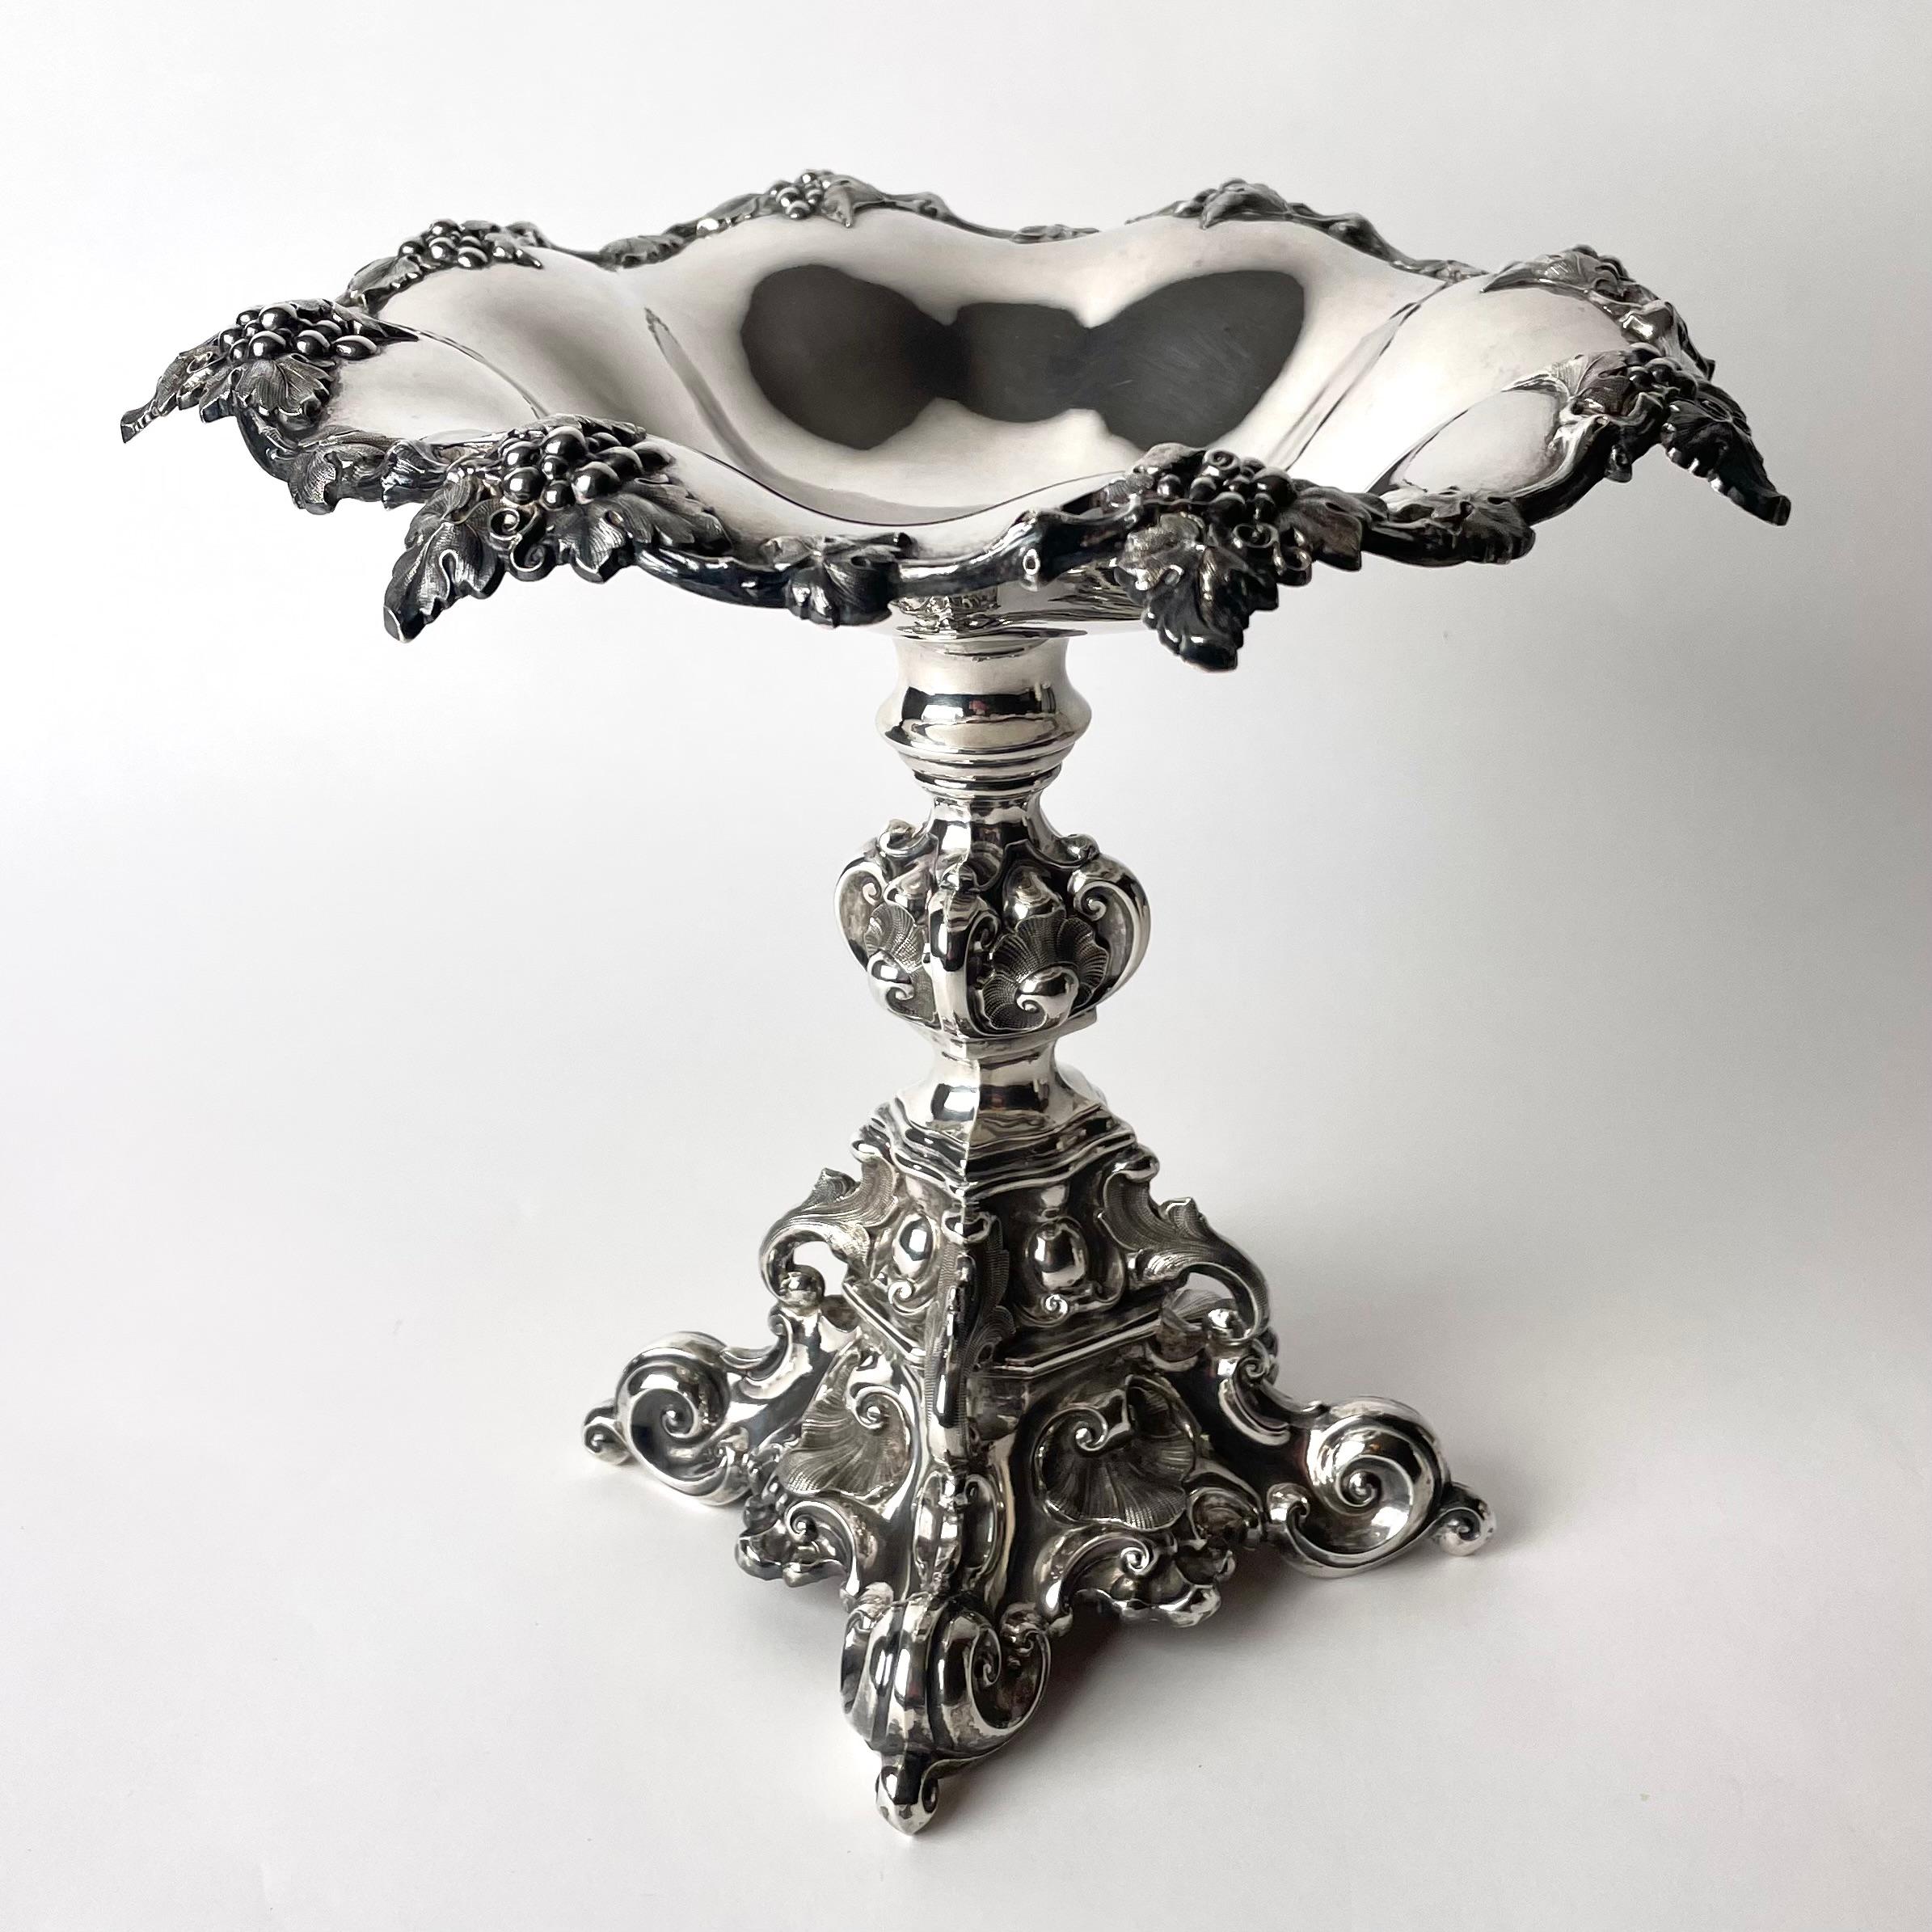 Very Elegant Fruit Bowl in hallmarked silver from Gothenburg, Sweden dated 1858 by L. Larson & Company. ( See photos)  Beautiful decorated  with bunches of grapes and Rococo elements. On the underside there is a later gift inscription  from 1942